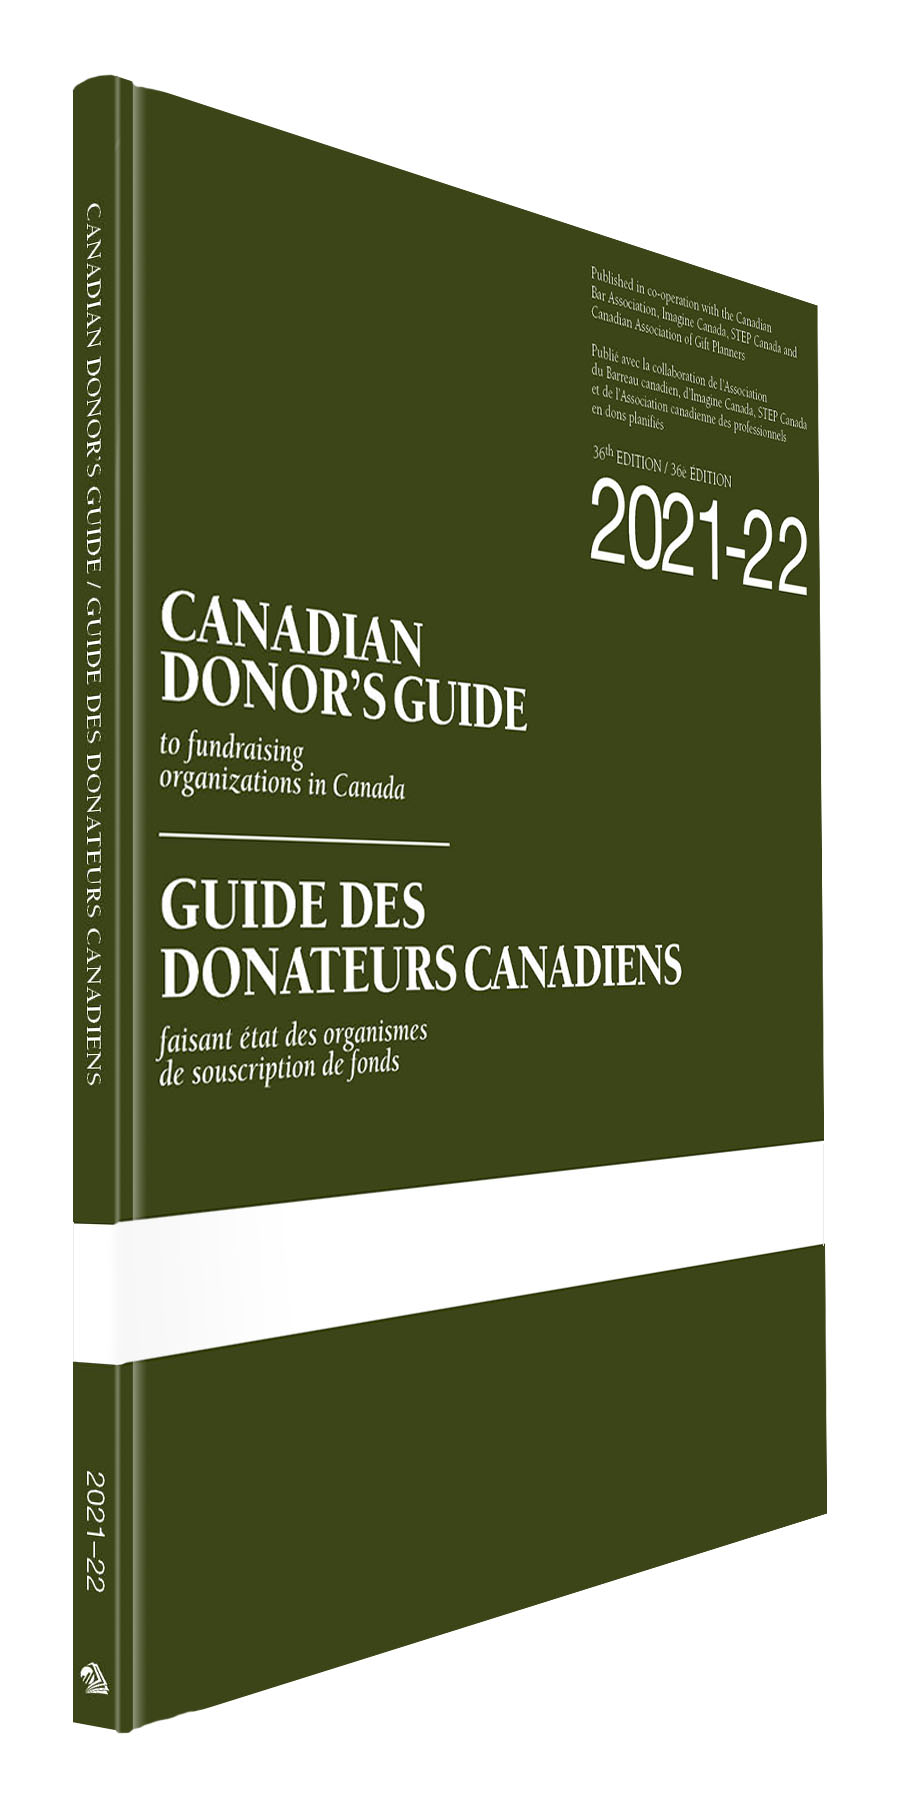 Canadian Donor's Guide